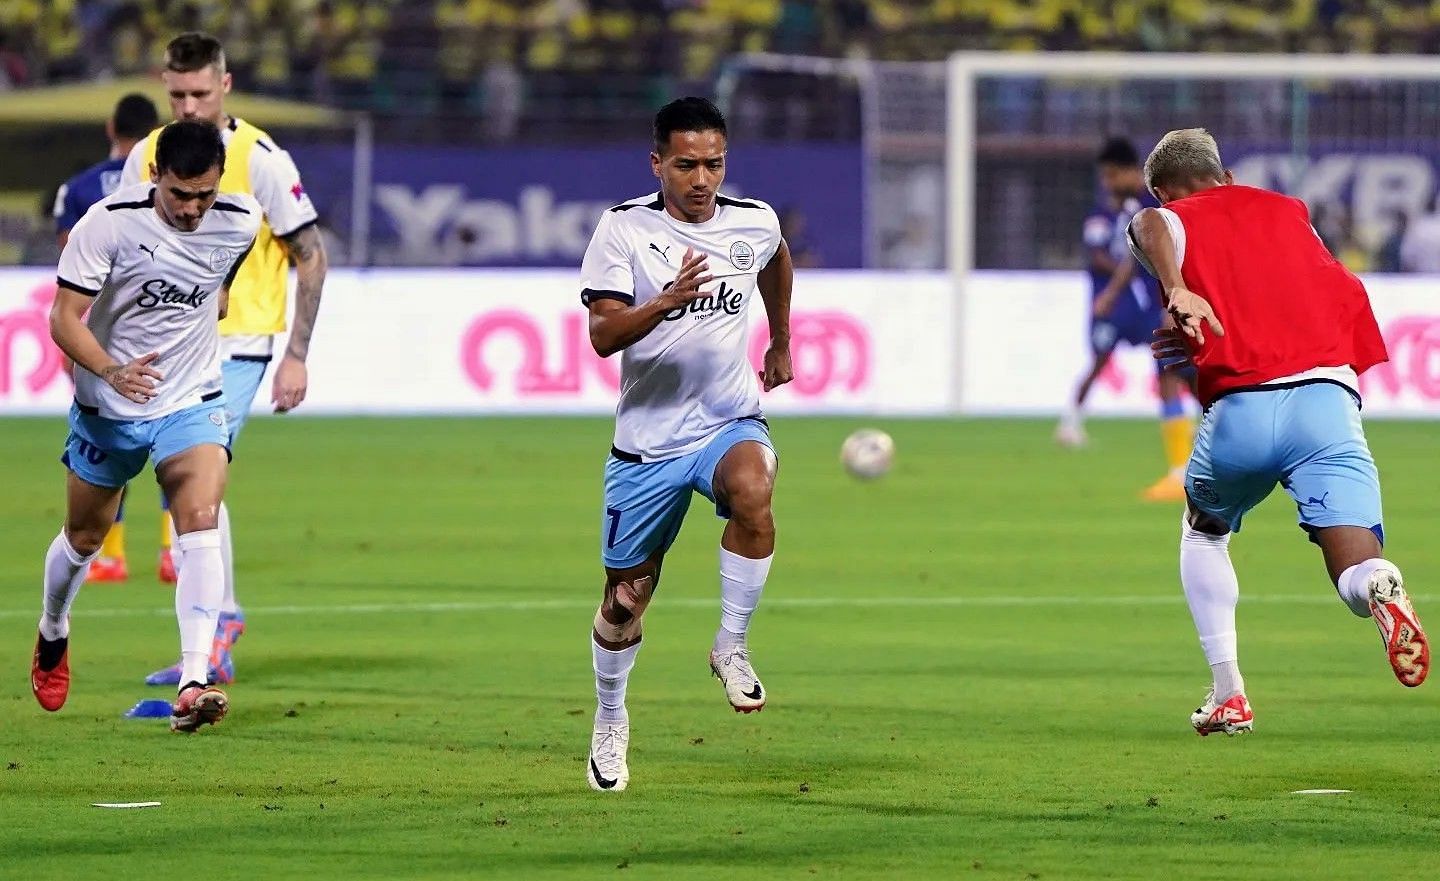 Mumbai City FC suffered their first defeat of the season against Kerala Blasters last week.